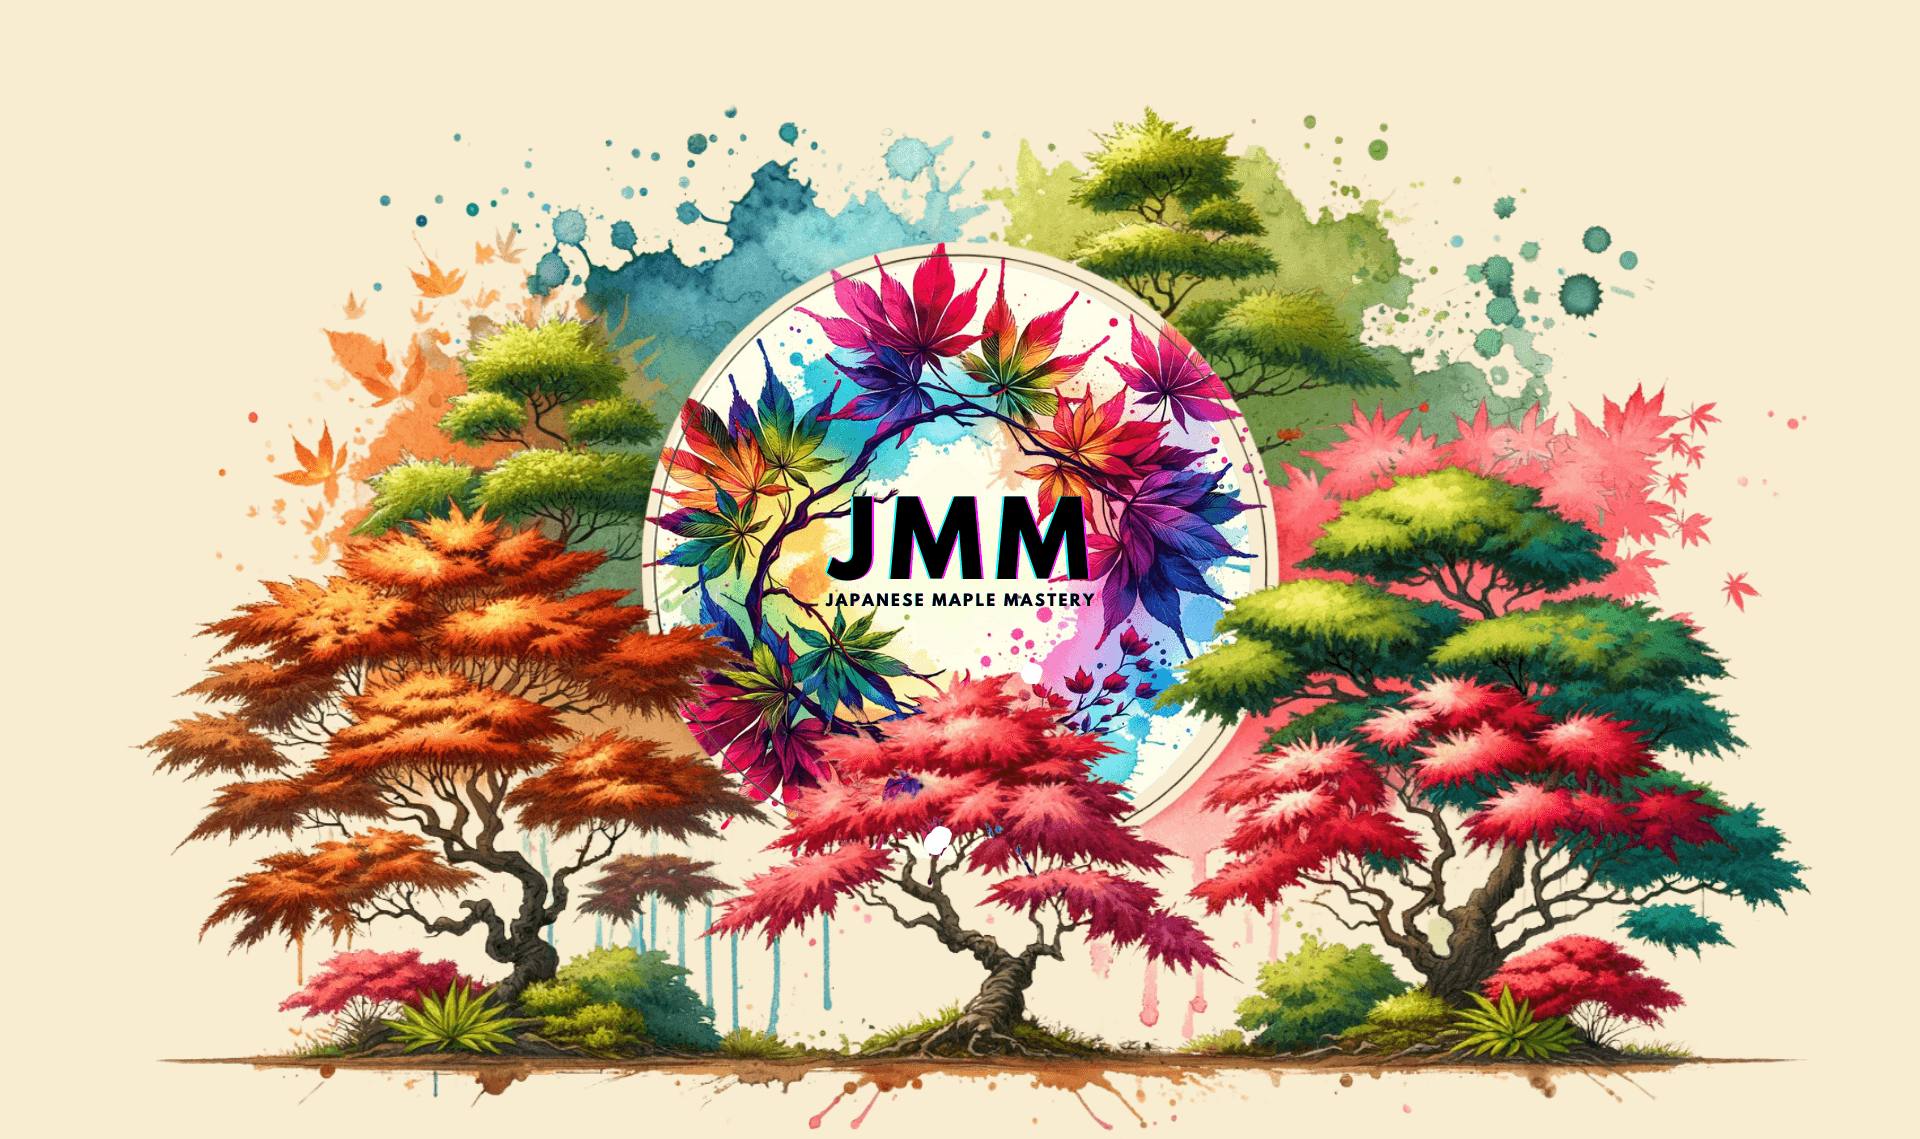 Japanese Maple Mastery logo and feature image